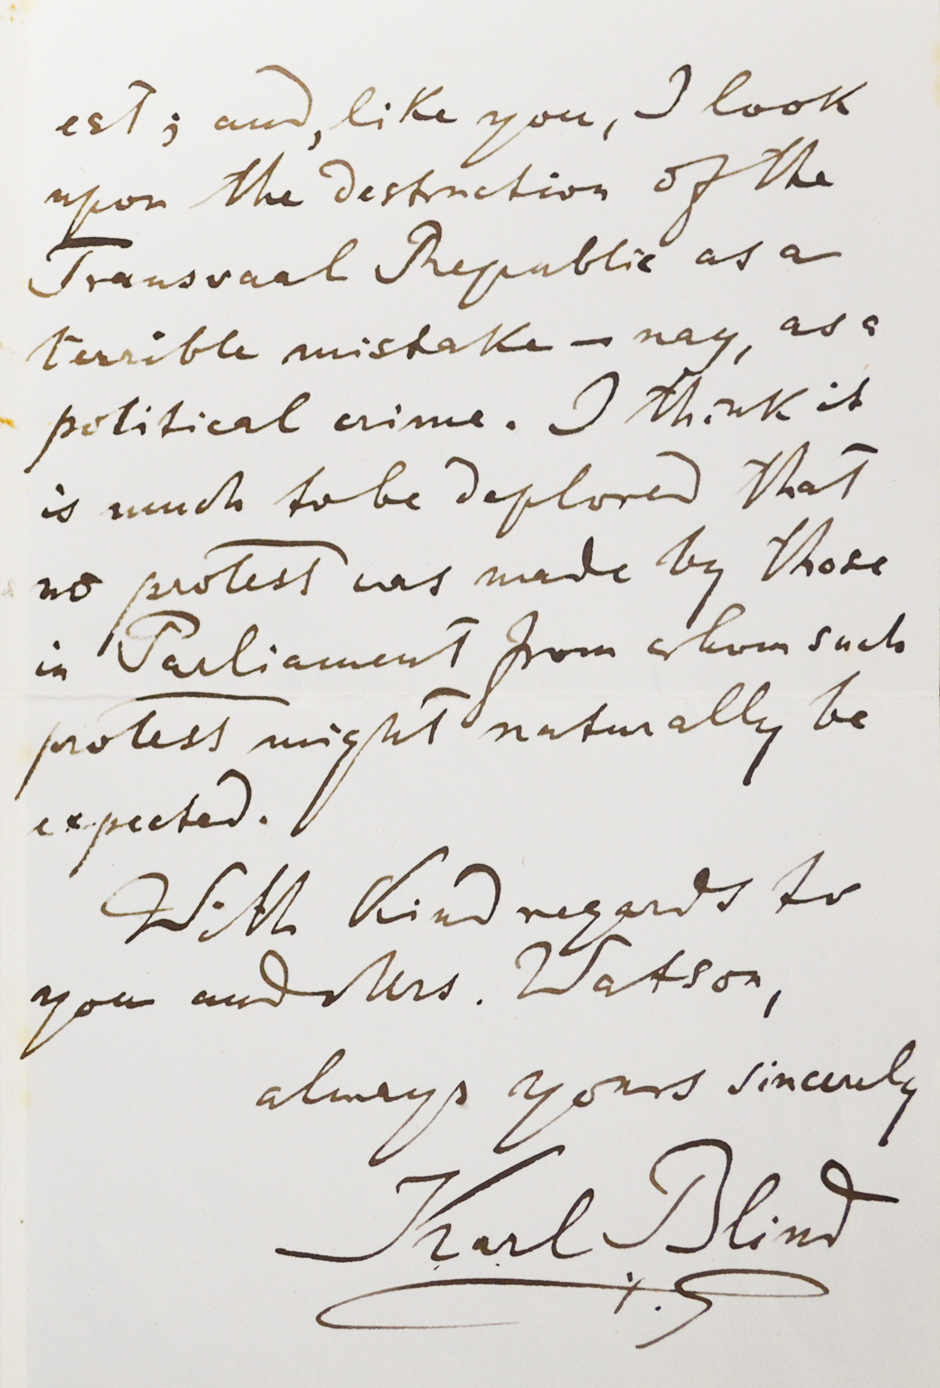 letter from German revolutionist and writer Karl Blind to Robert